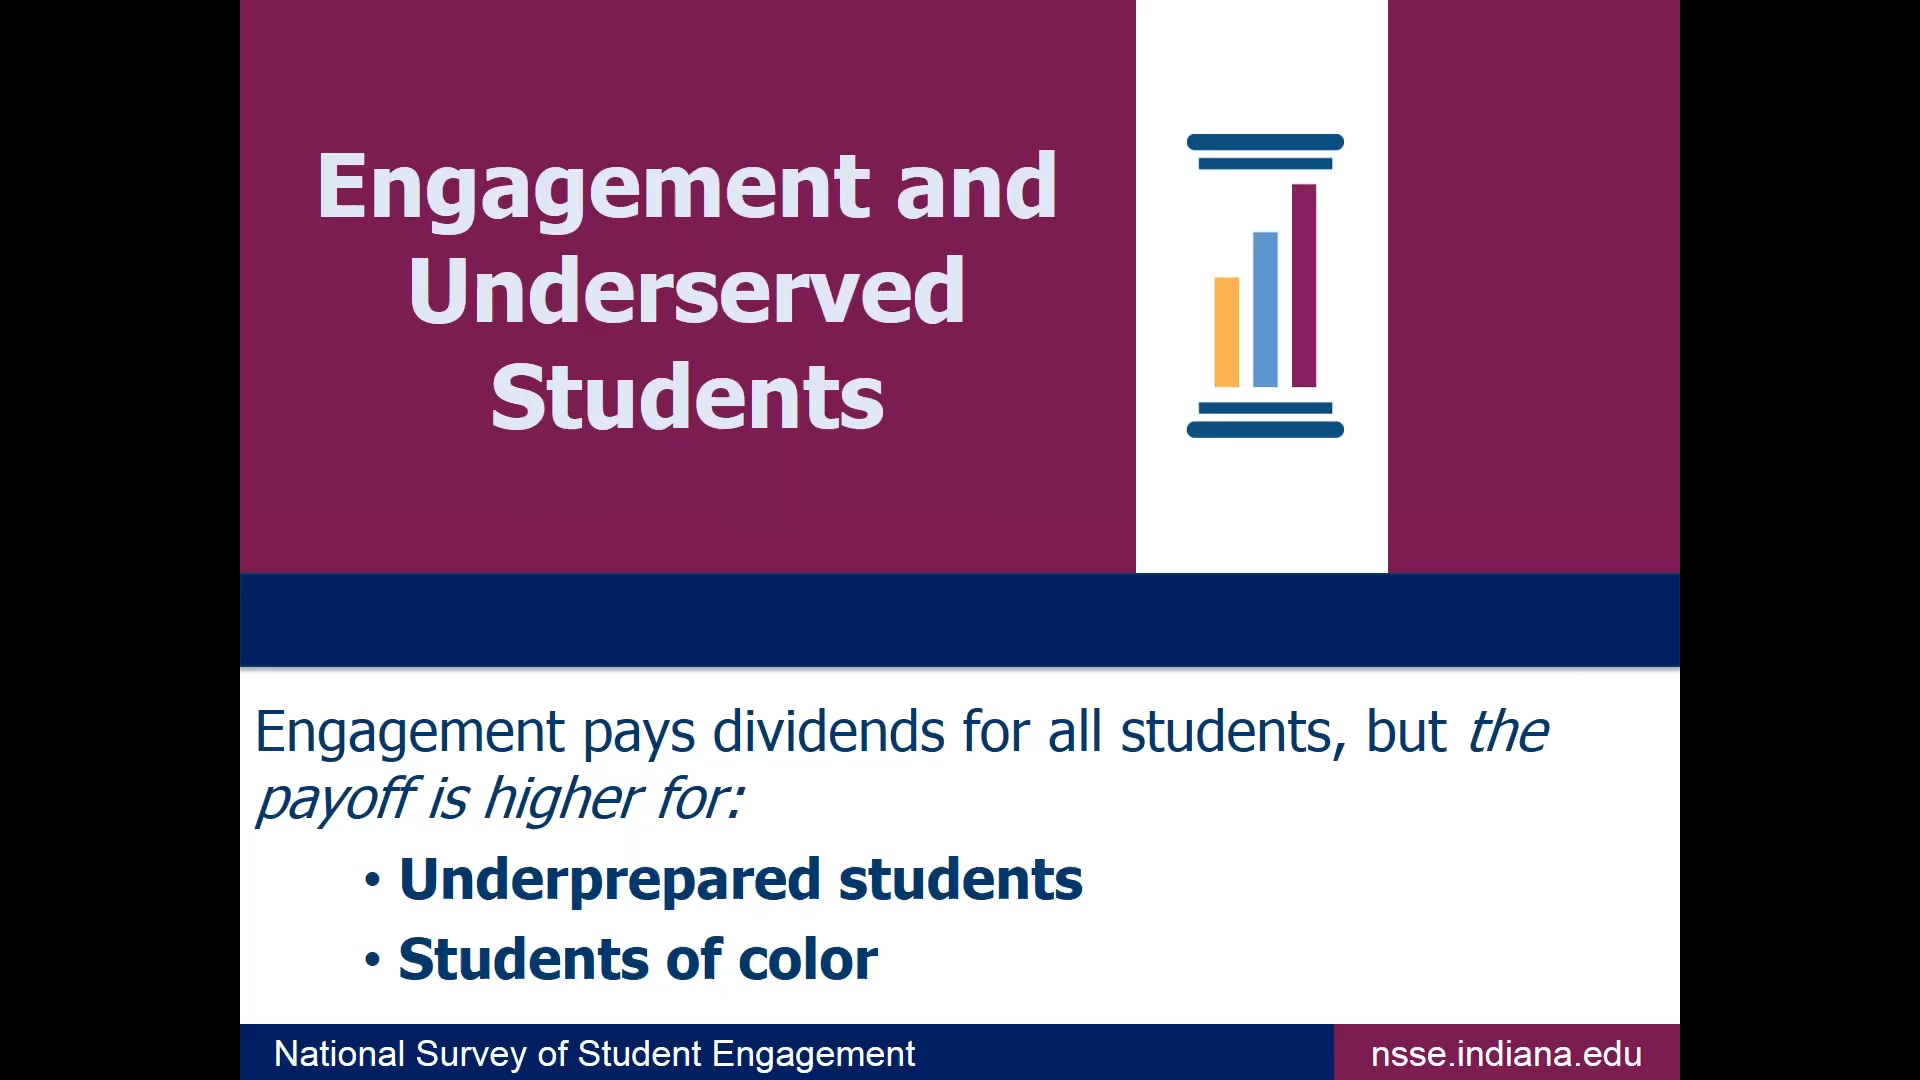 What Student Engagement Tells Us About Our Undergraduates